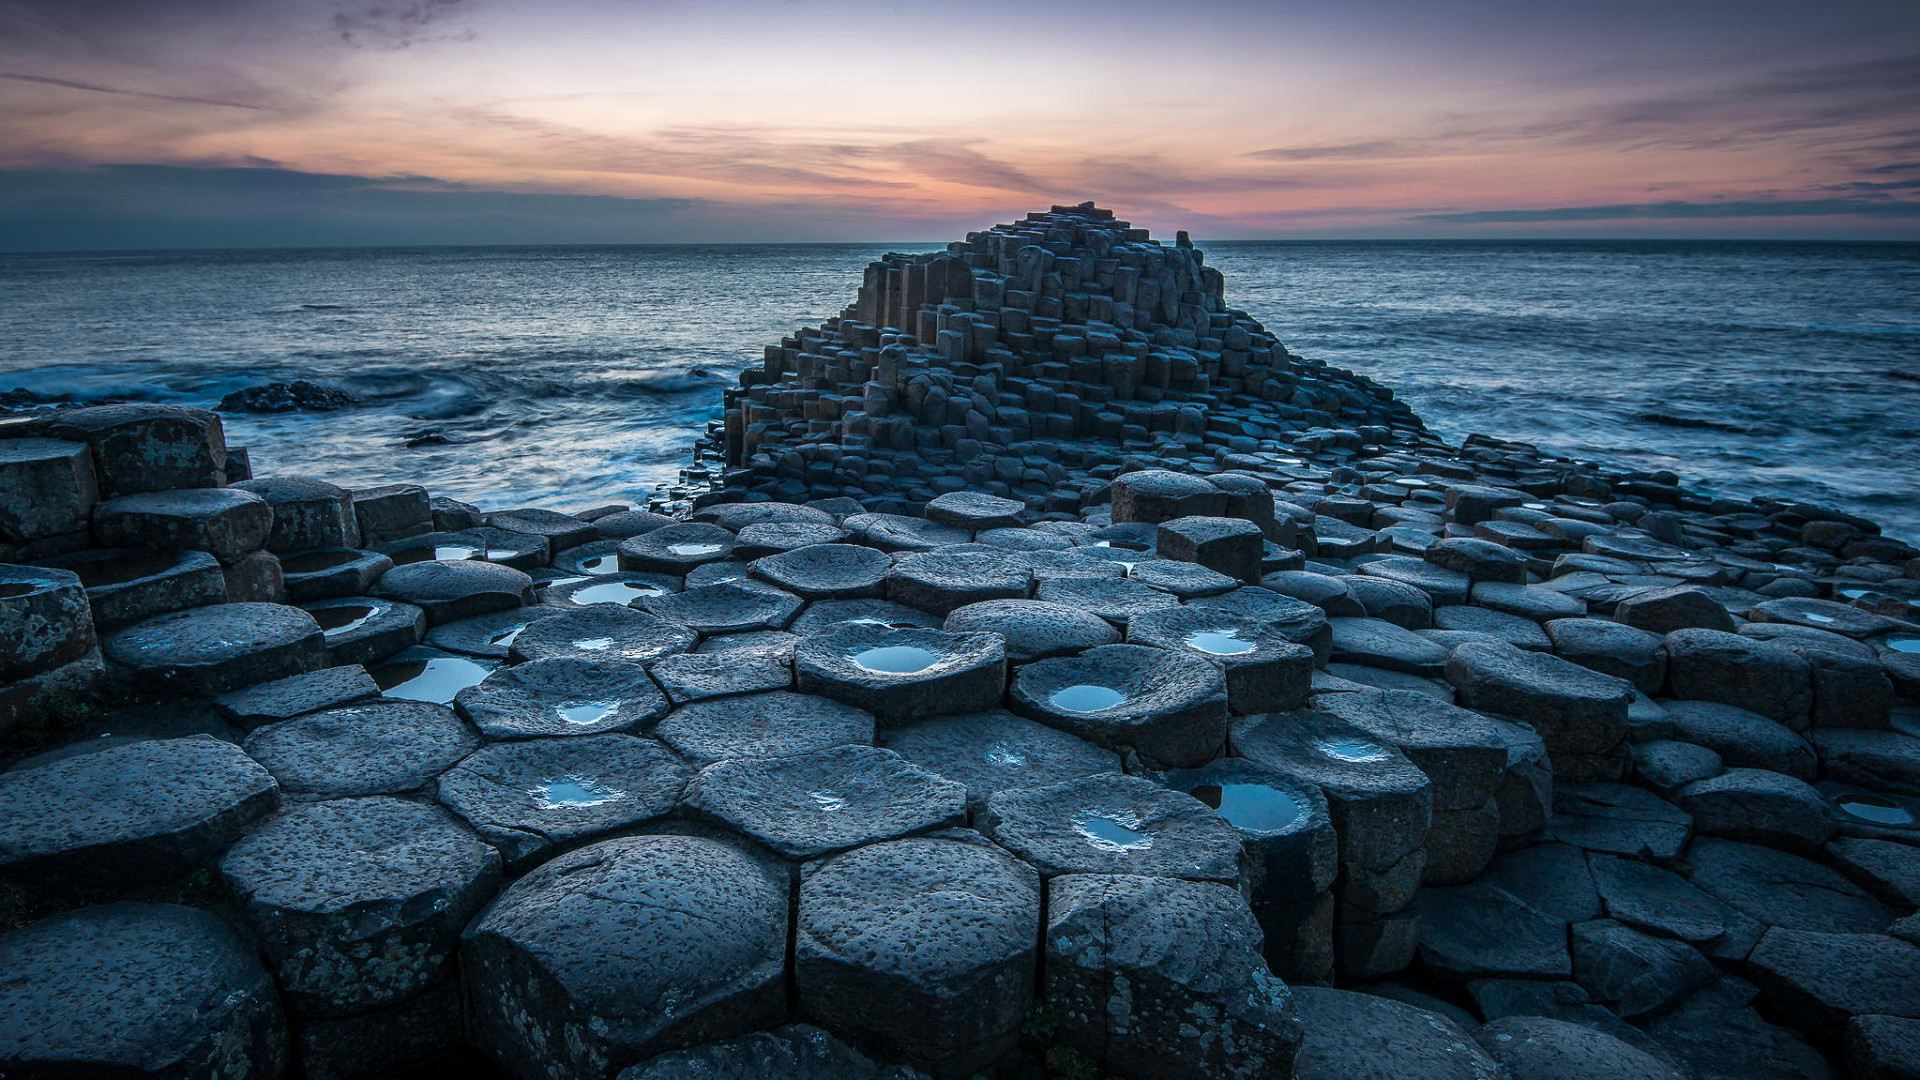 1920x1080 The Giant's Causeway - an area of about 40,000 interlocking basalt columns  on the northeast coast of Northern Ireland - photograph by Greg Sinclair ...